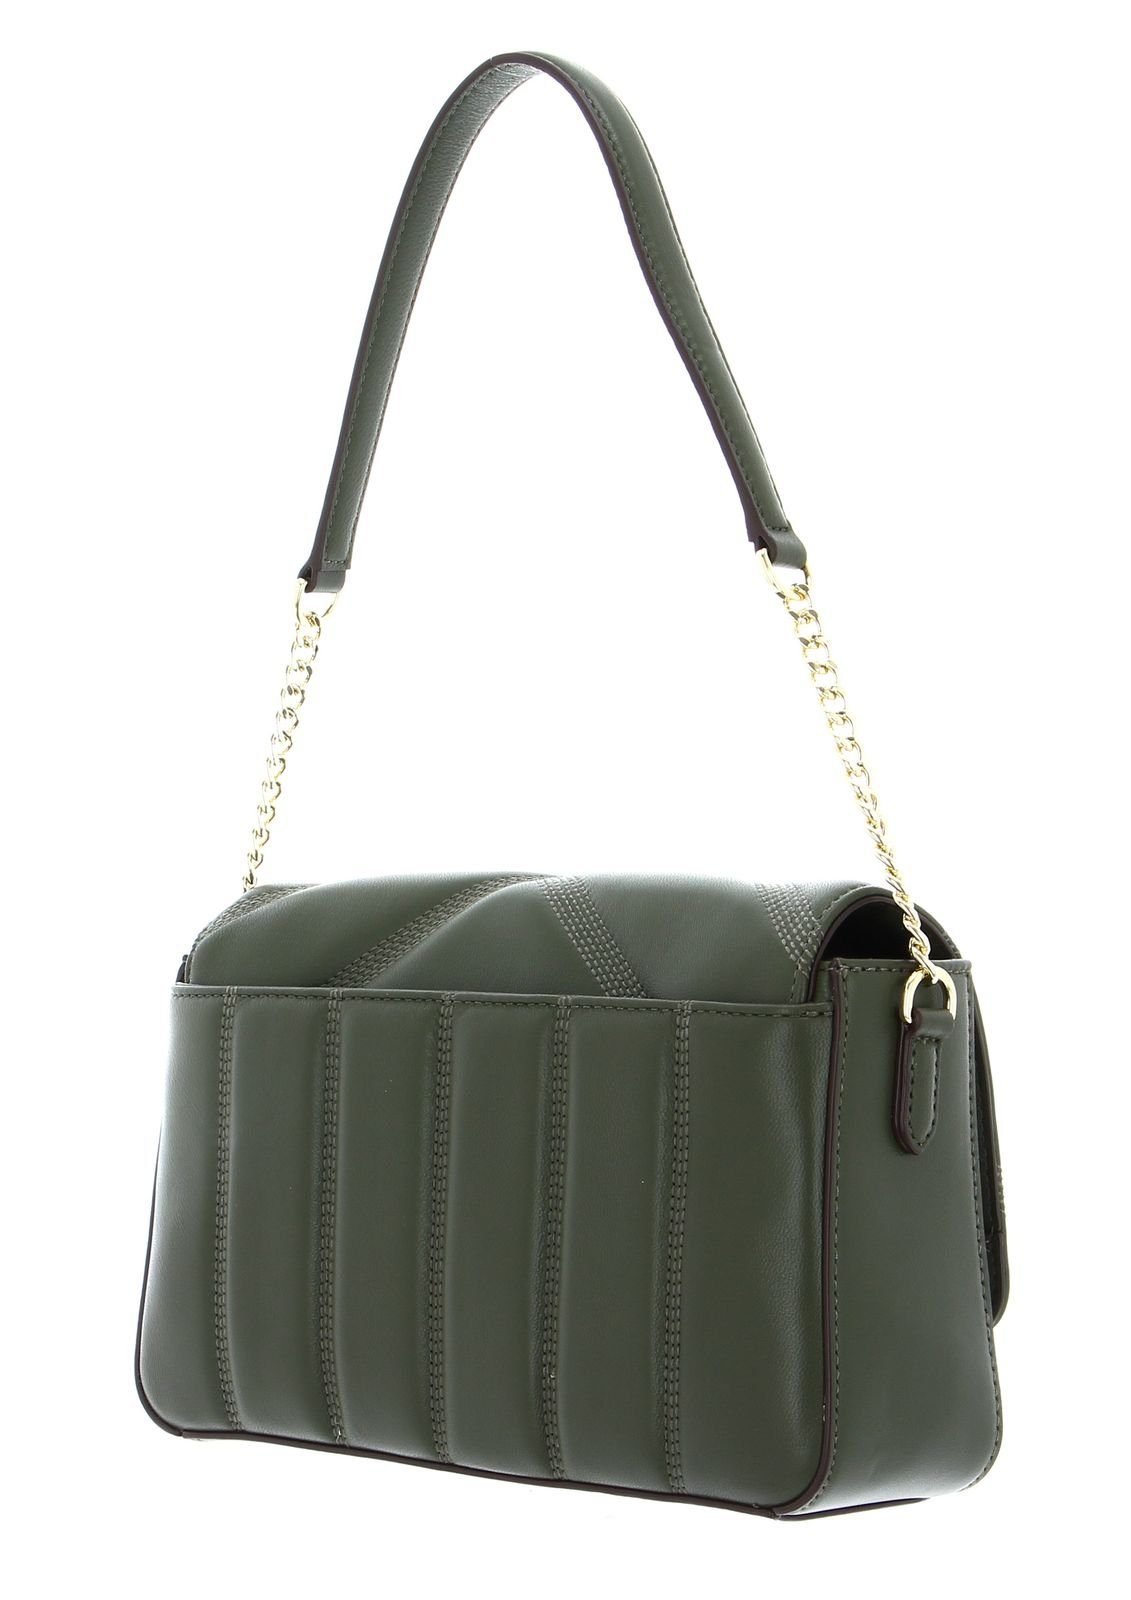 Becca Army Schultertasche DKNY Green